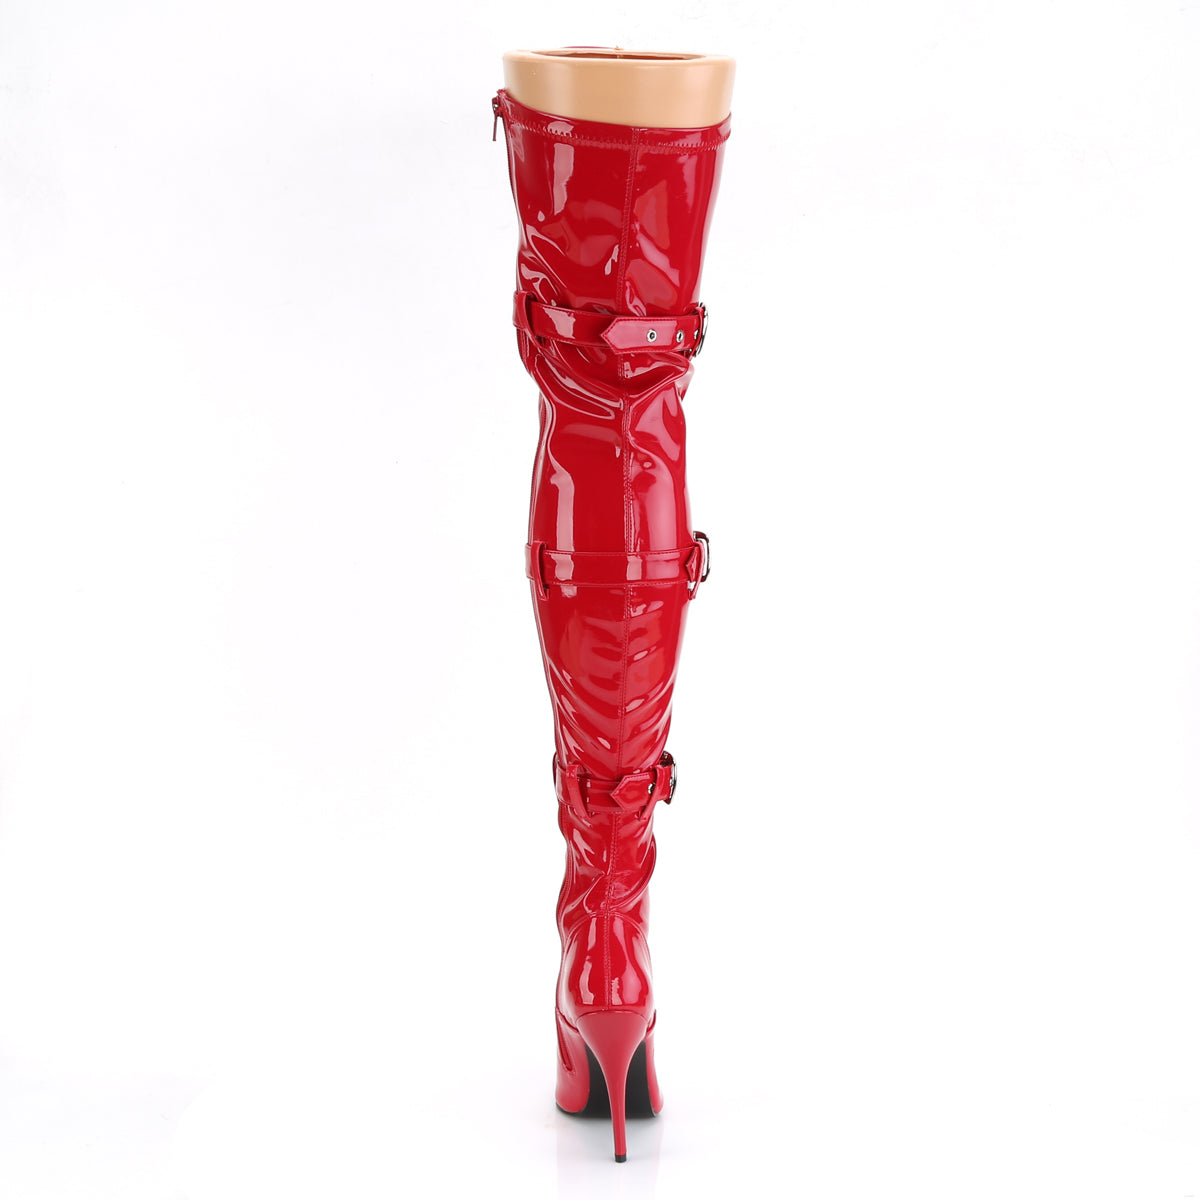 SEDUCE-3028 Pleaser Red Stretch Patent Single Sole Shoes [Thigh High Boots]